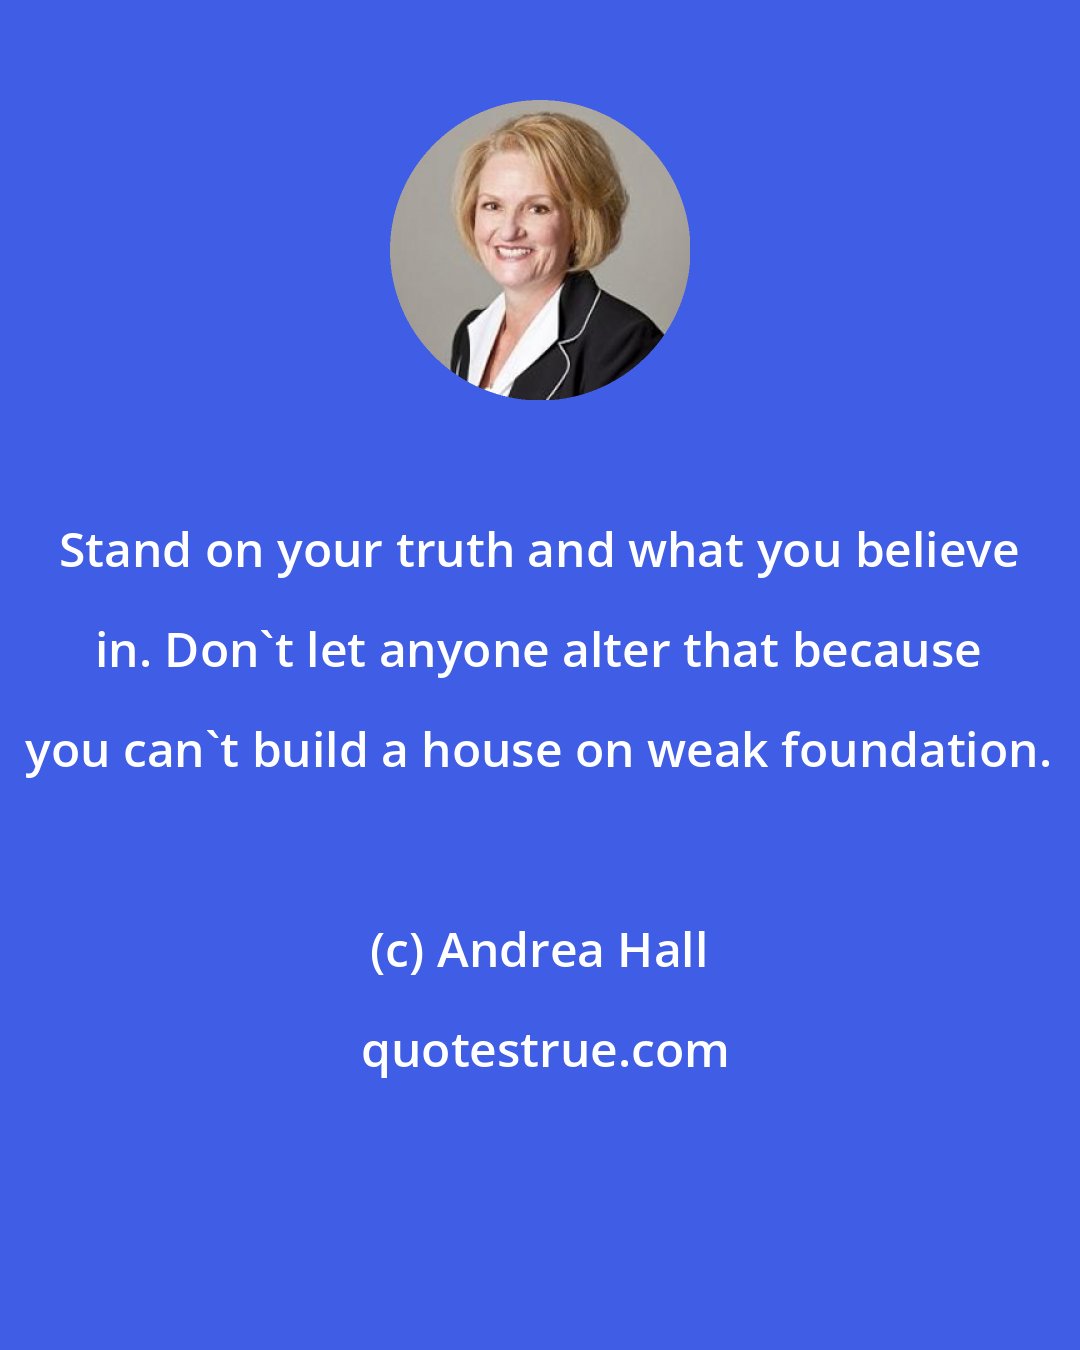 Andrea Hall: Stand on your truth and what you believe in. Don't let anyone alter that because you can't build a house on weak foundation.